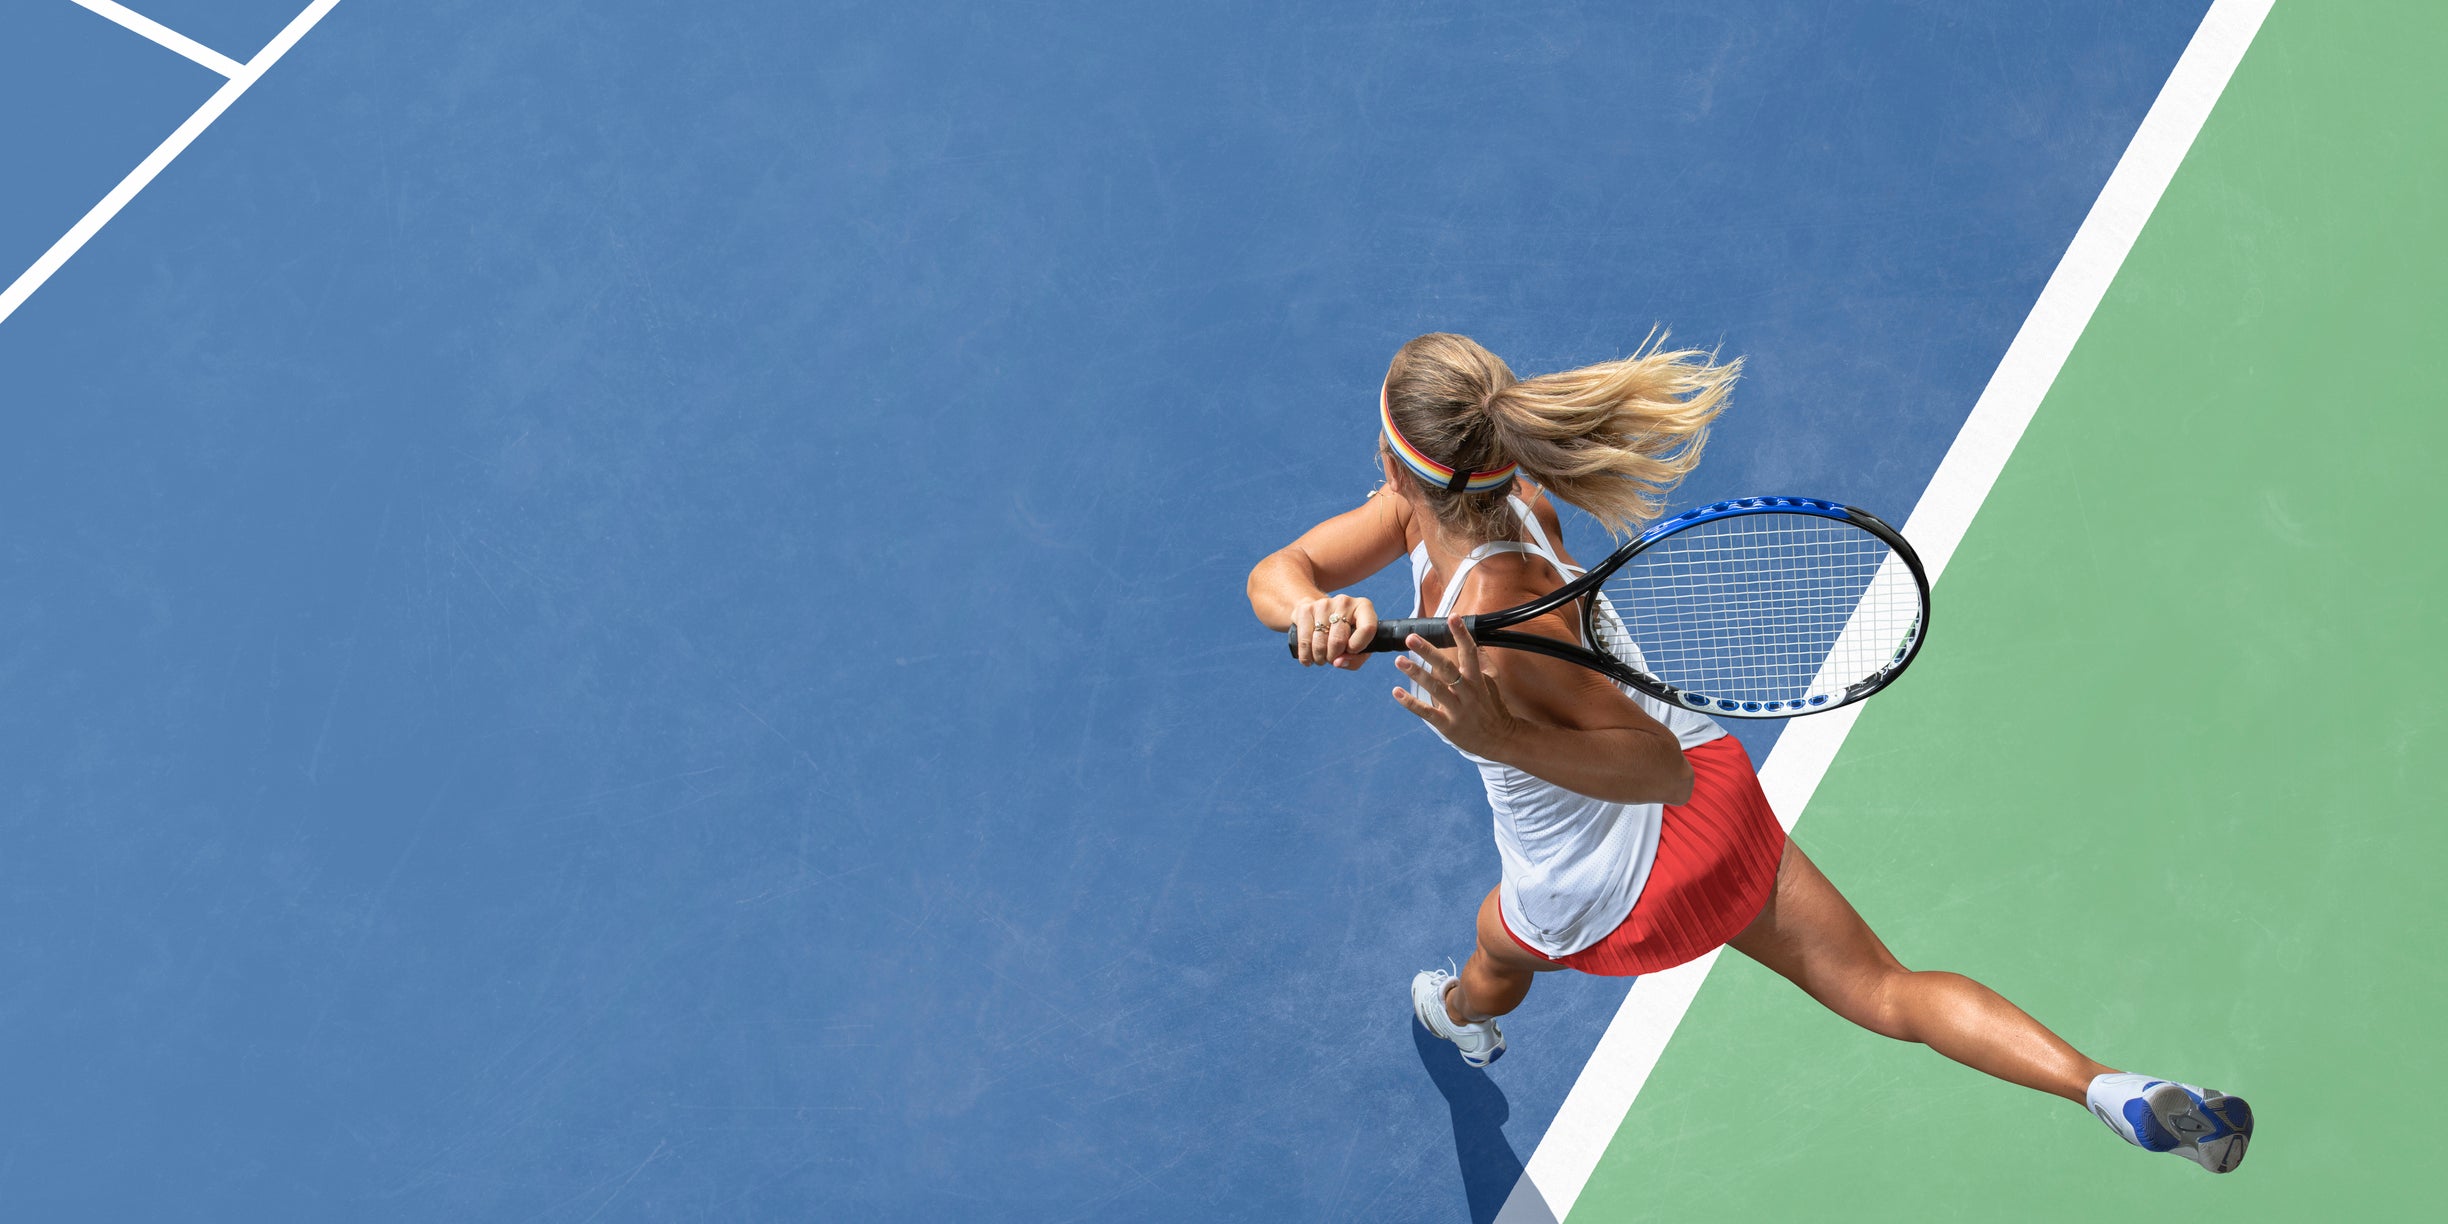 Abstract Top View Of Female Tennis Player After Serve